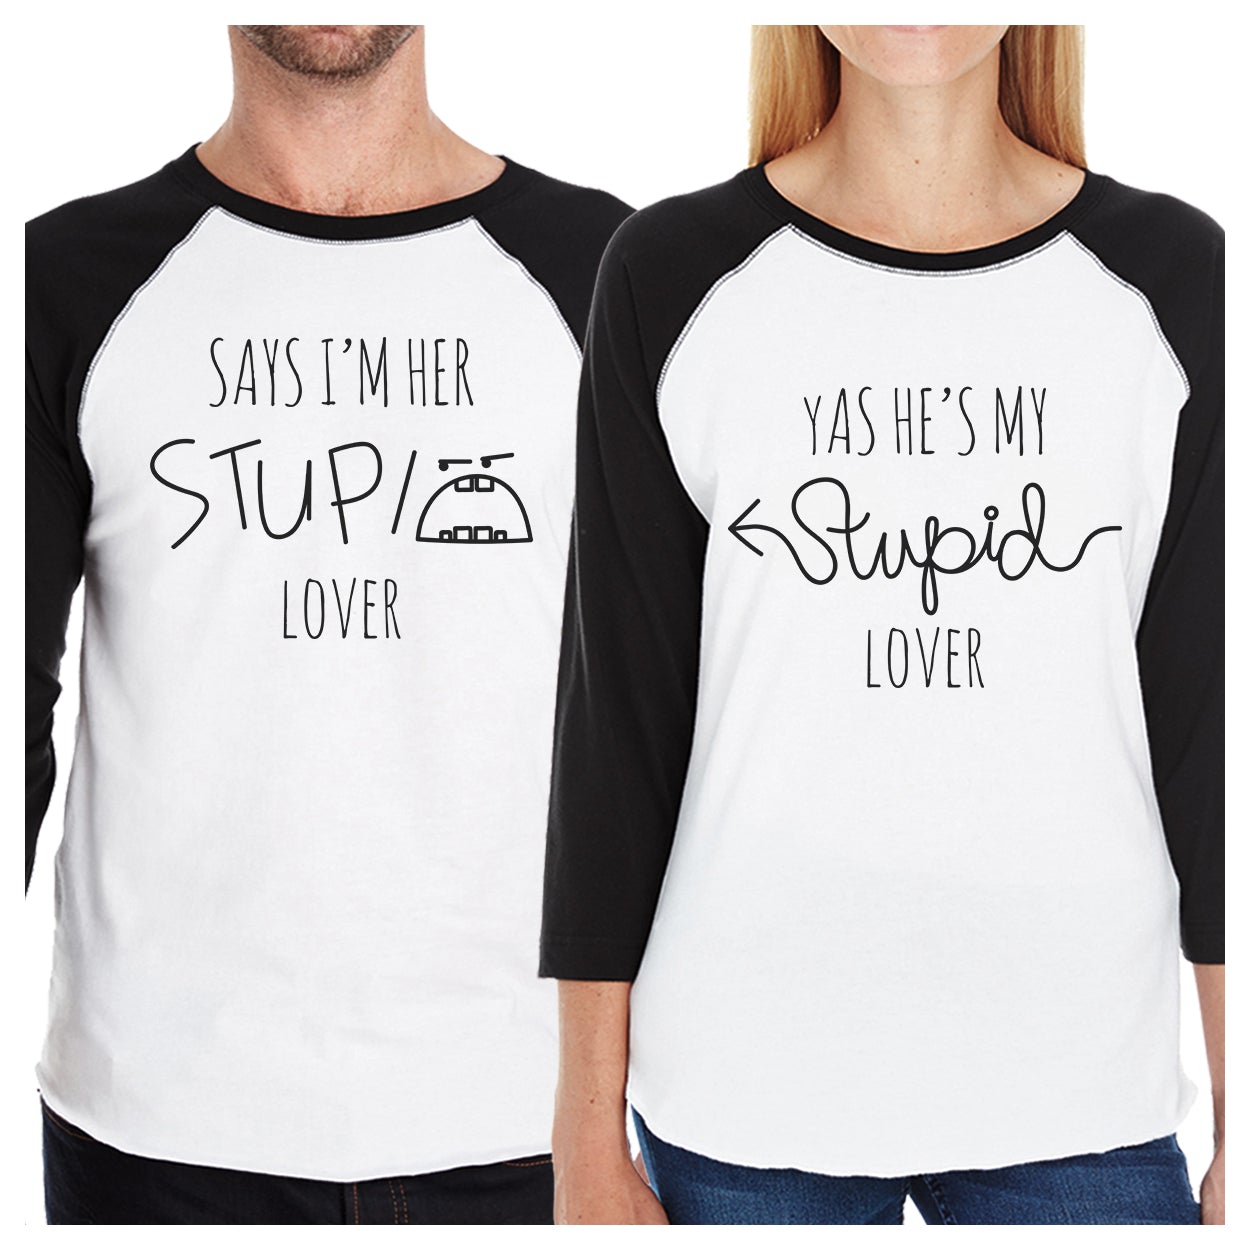 Her Stupid Lover And My Stupid Lover Matching Couple Black And White Baseball Shirts